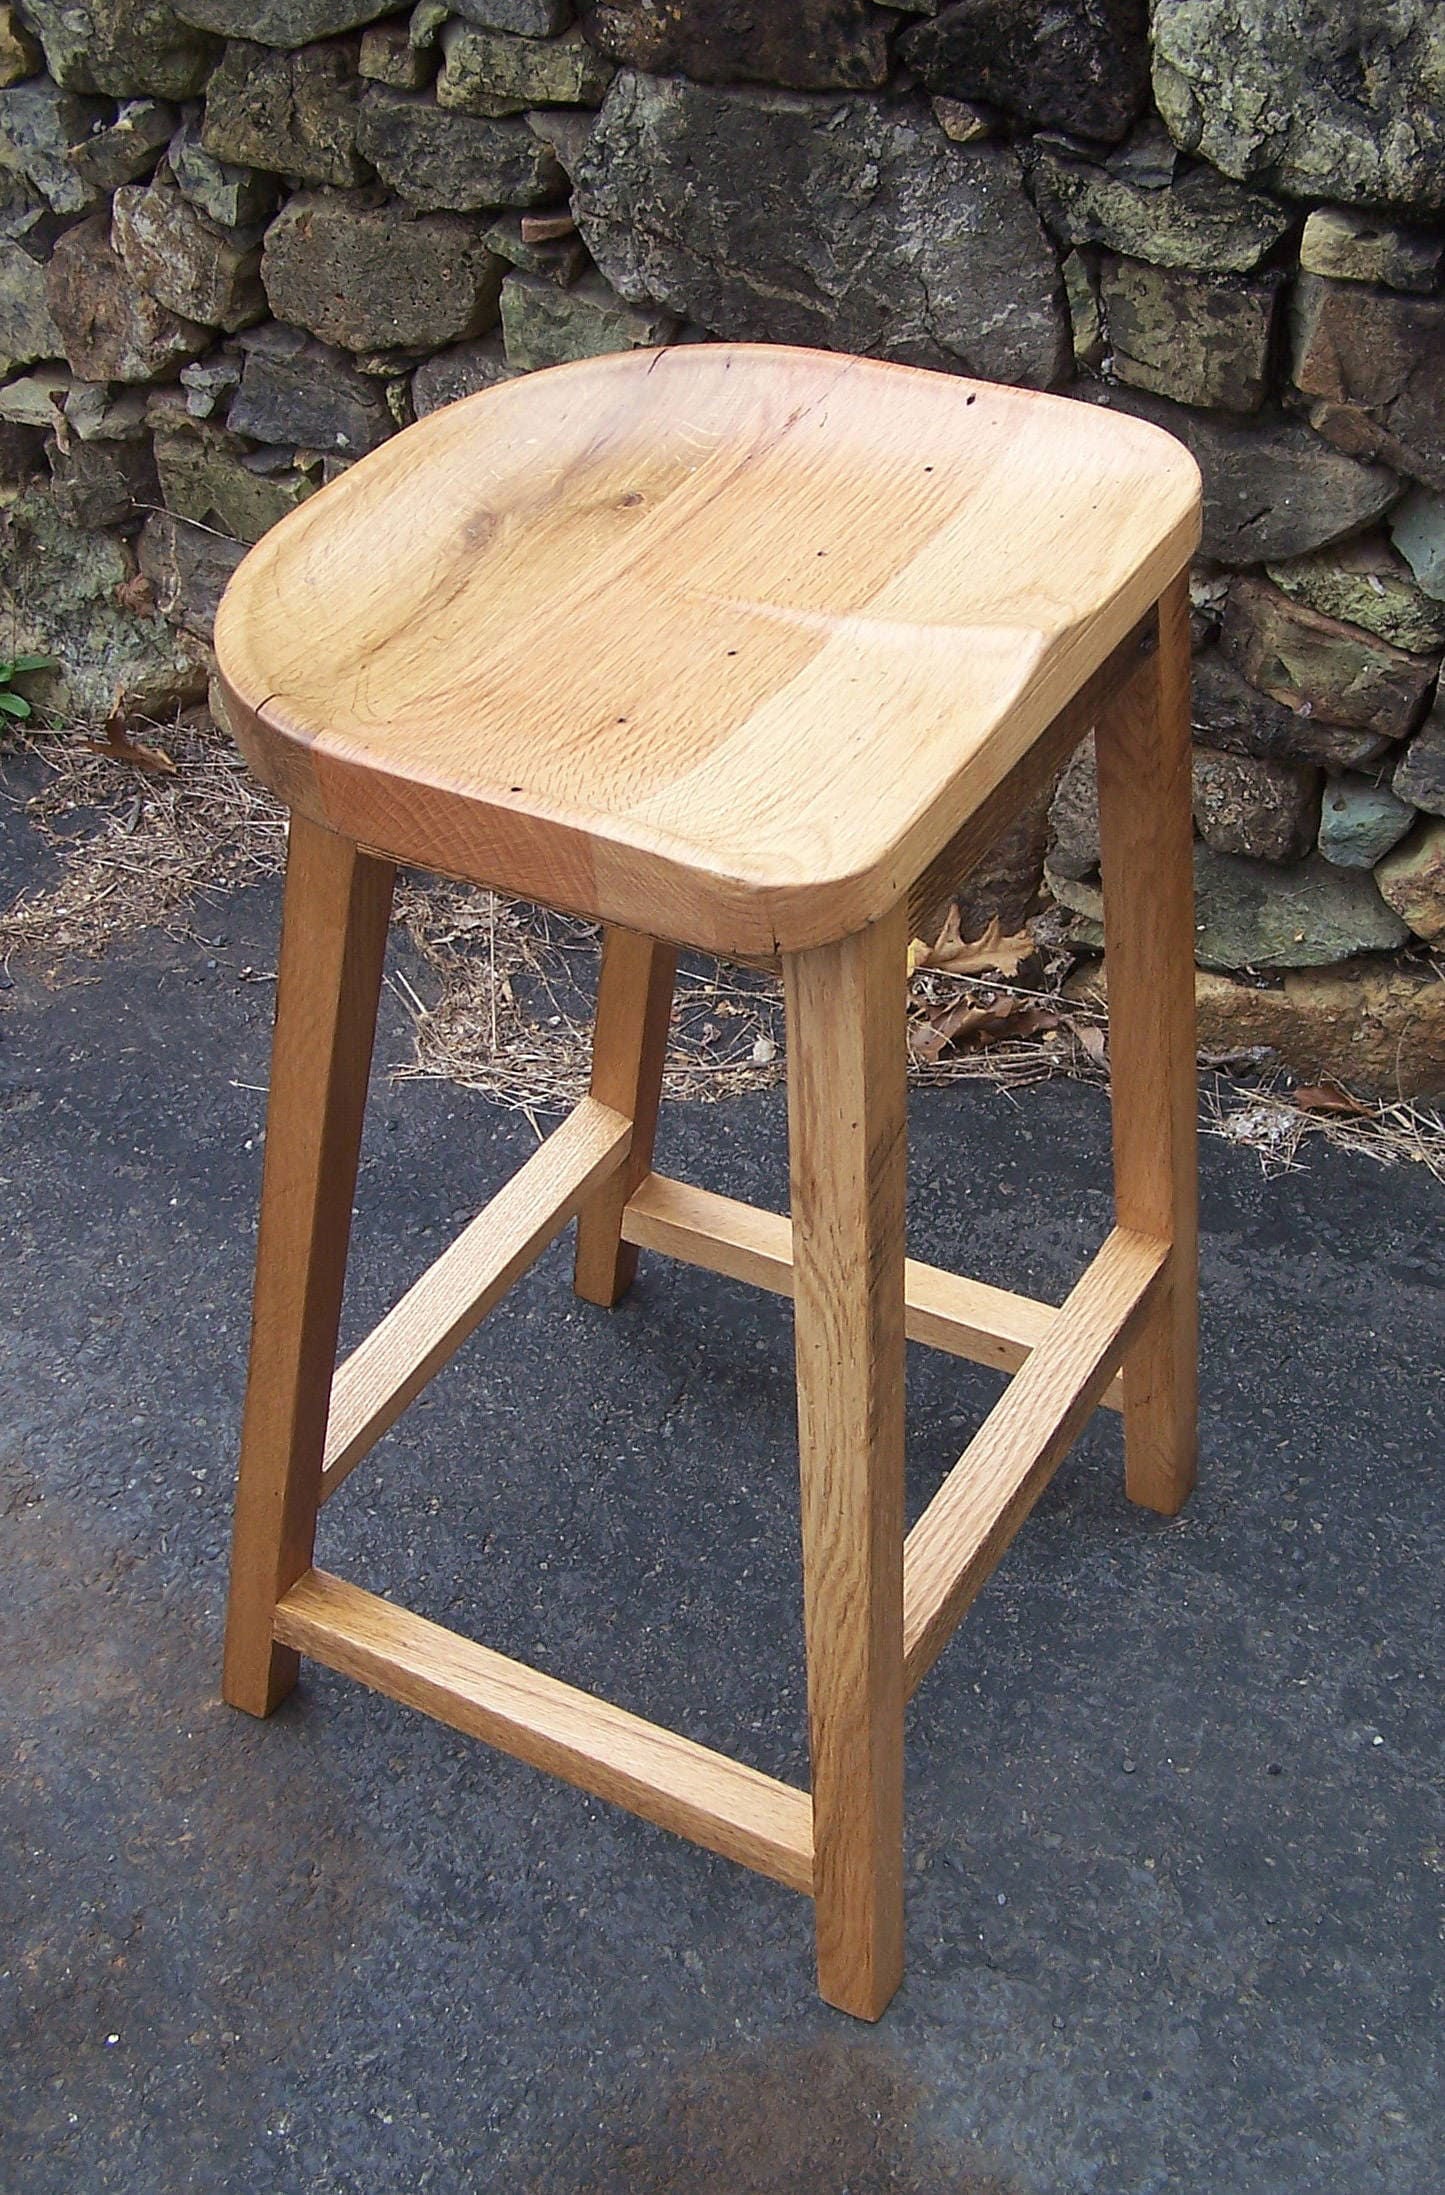 Counter Stools, Counter Height Stools, Wood Bar Stool, Reclaimed Oak Tractor Seat, Backless Bar Stools, Contoured Scooped Seat Kitchen Stool - Mac & Mabel